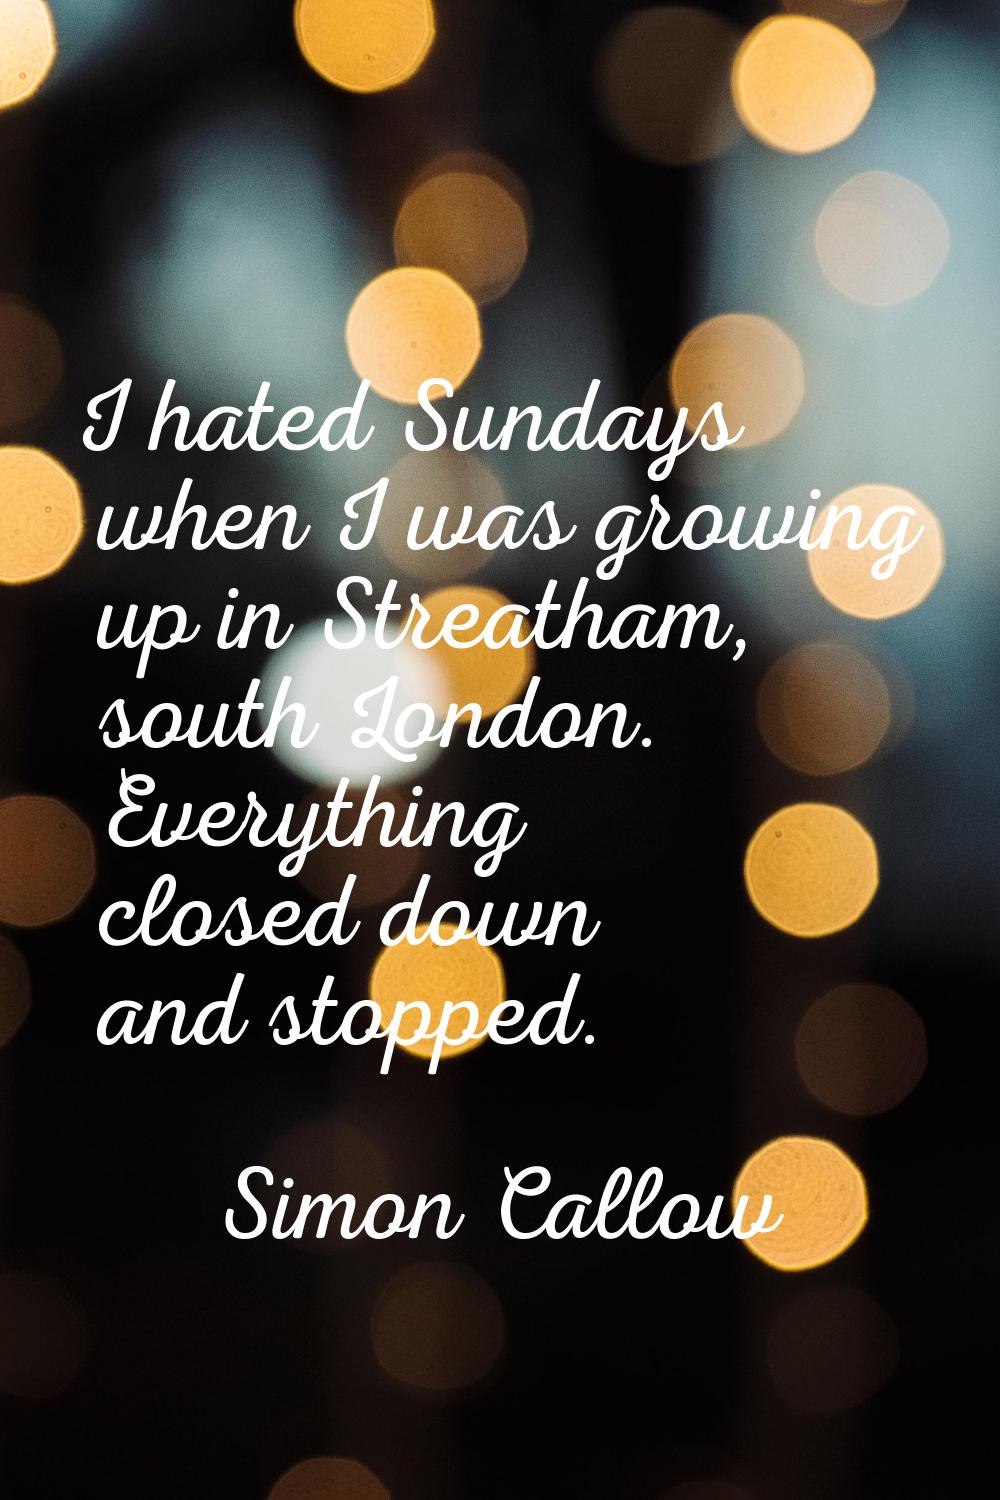 I hated Sundays when I was growing up in Streatham, south London. Everything closed down and stoppe